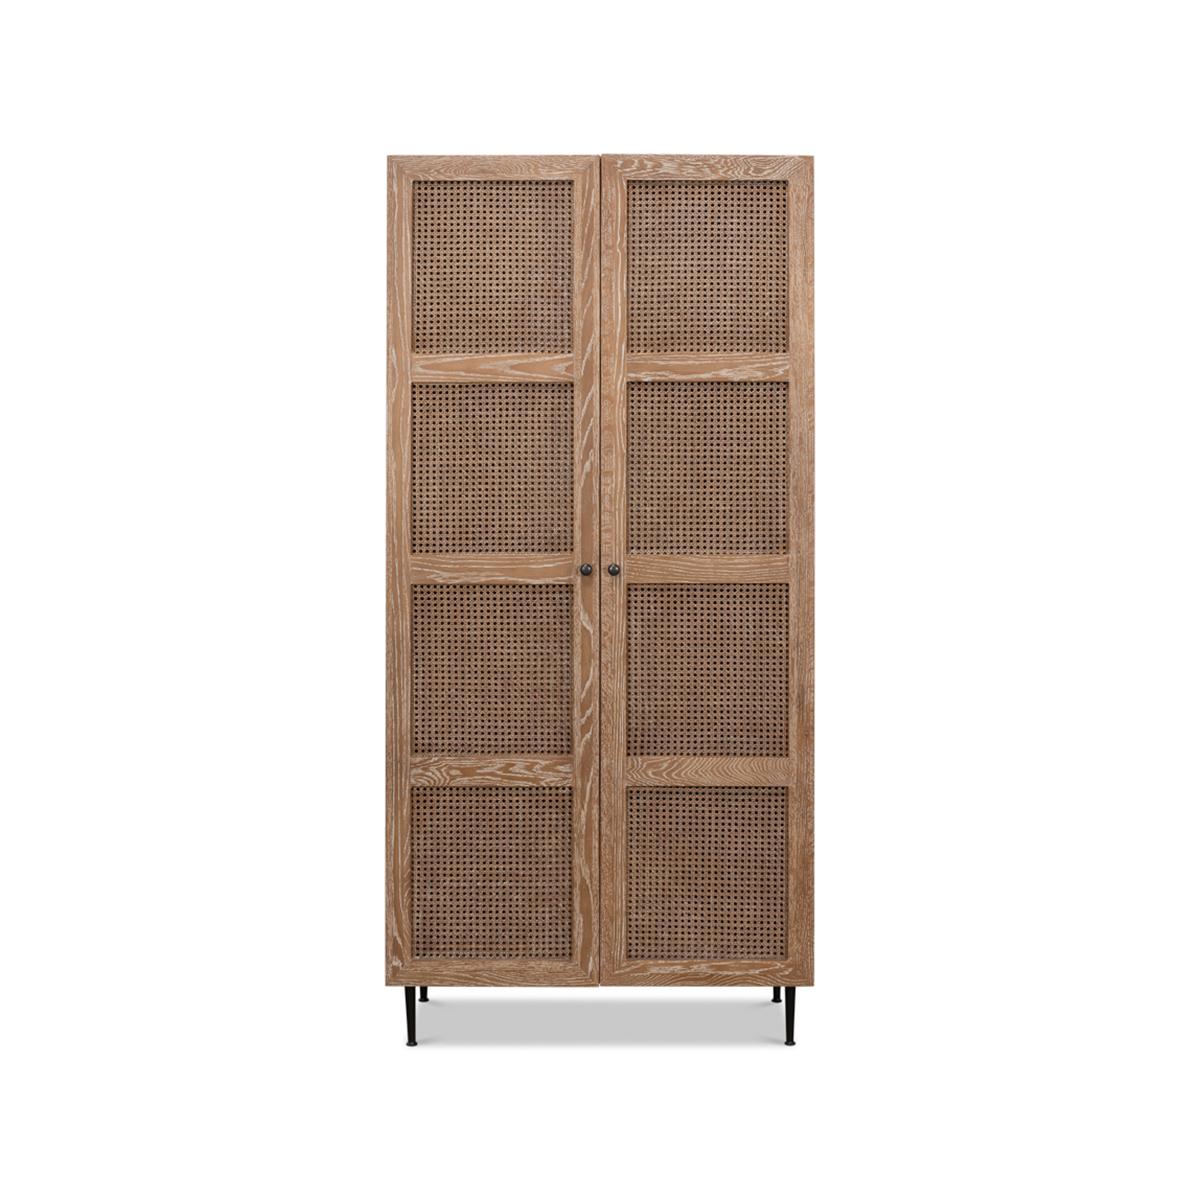 An elegant modern cabinet with two caned doors in a cerused white wash oak finish. The interior is fitted with shelves and raised on simple modern metal legs.

Dimensions: 35